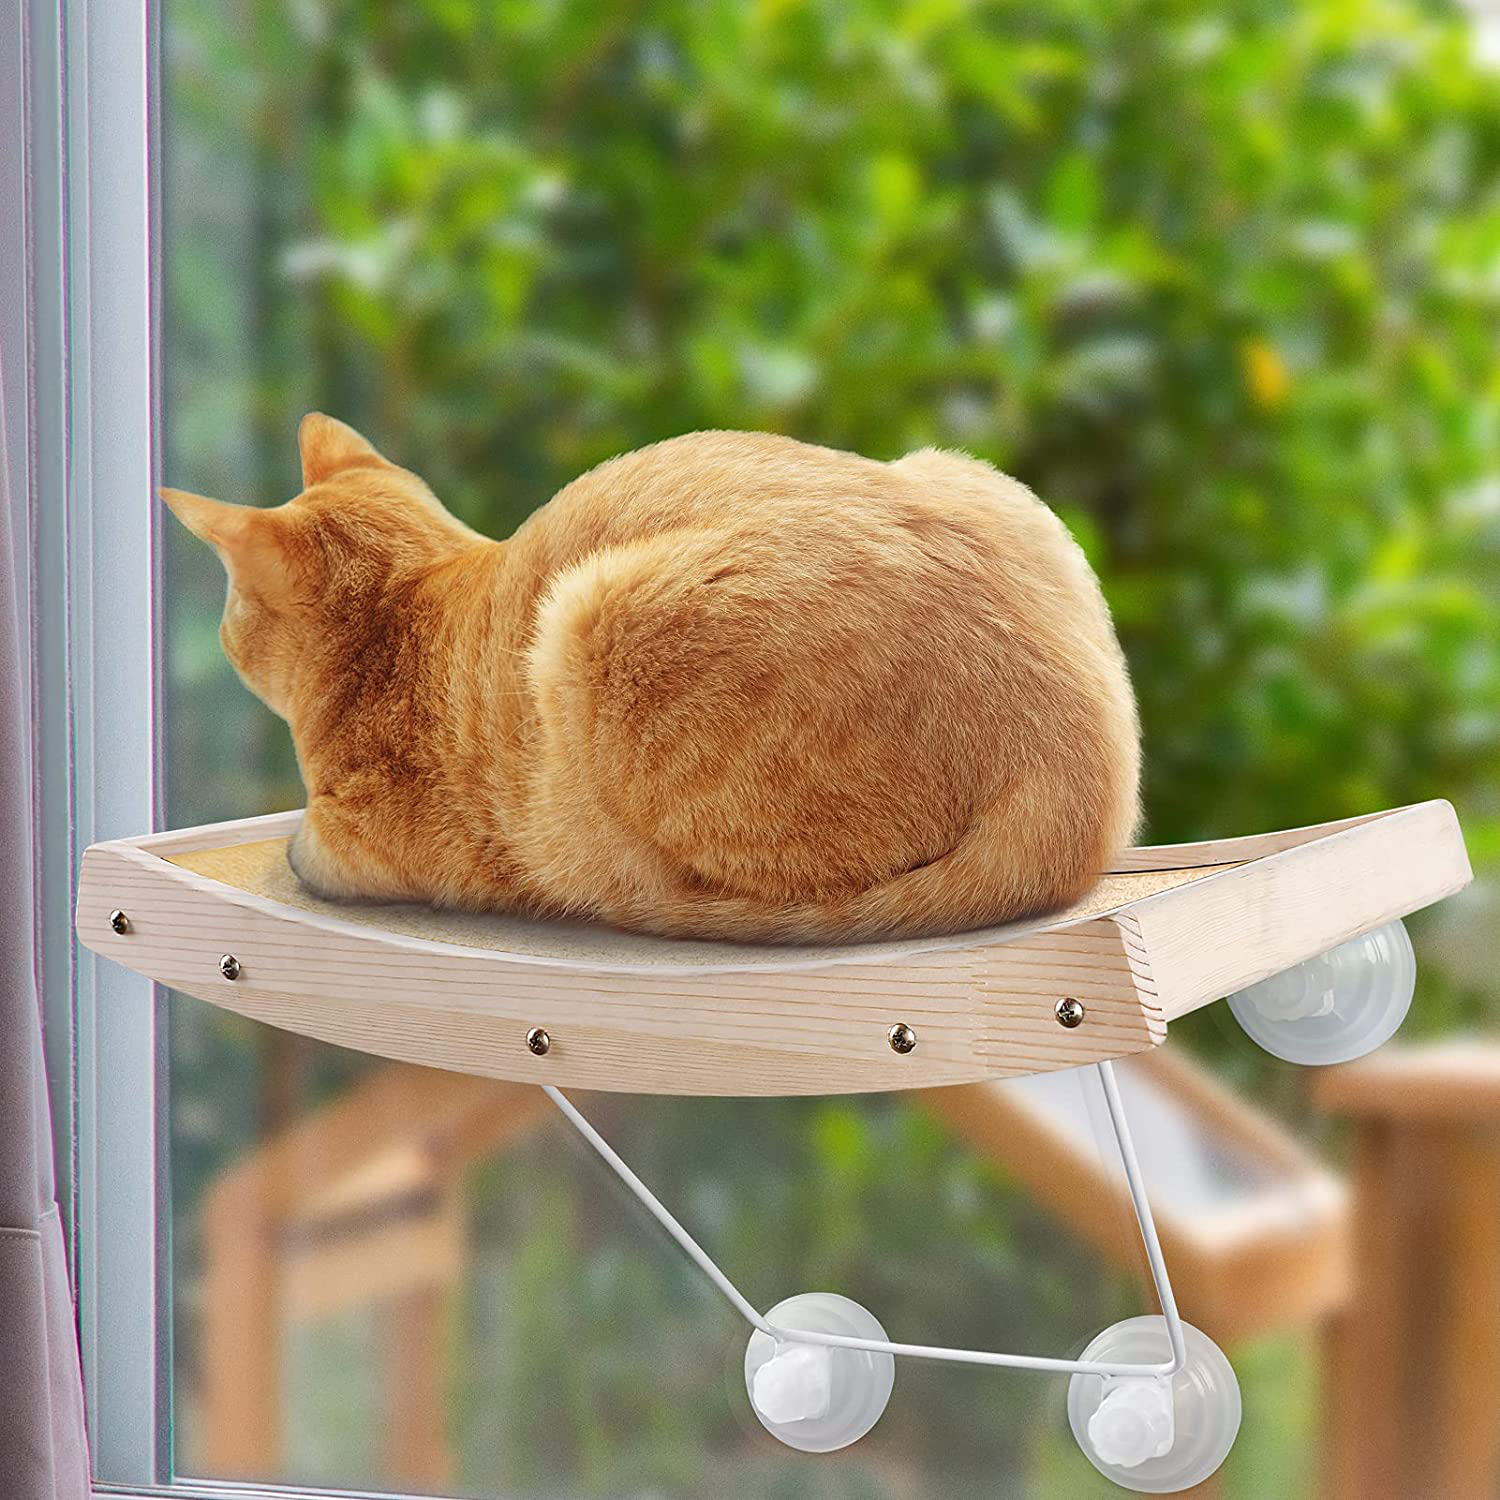 JOYO Cat Window Perch, Cat Hammock Window Seat with Strong Suction Cups, Window Mounted Cat Bed for Indoor Cats, Weighted up to 40Lb, Safety, Space Saving, Easy to Assemble